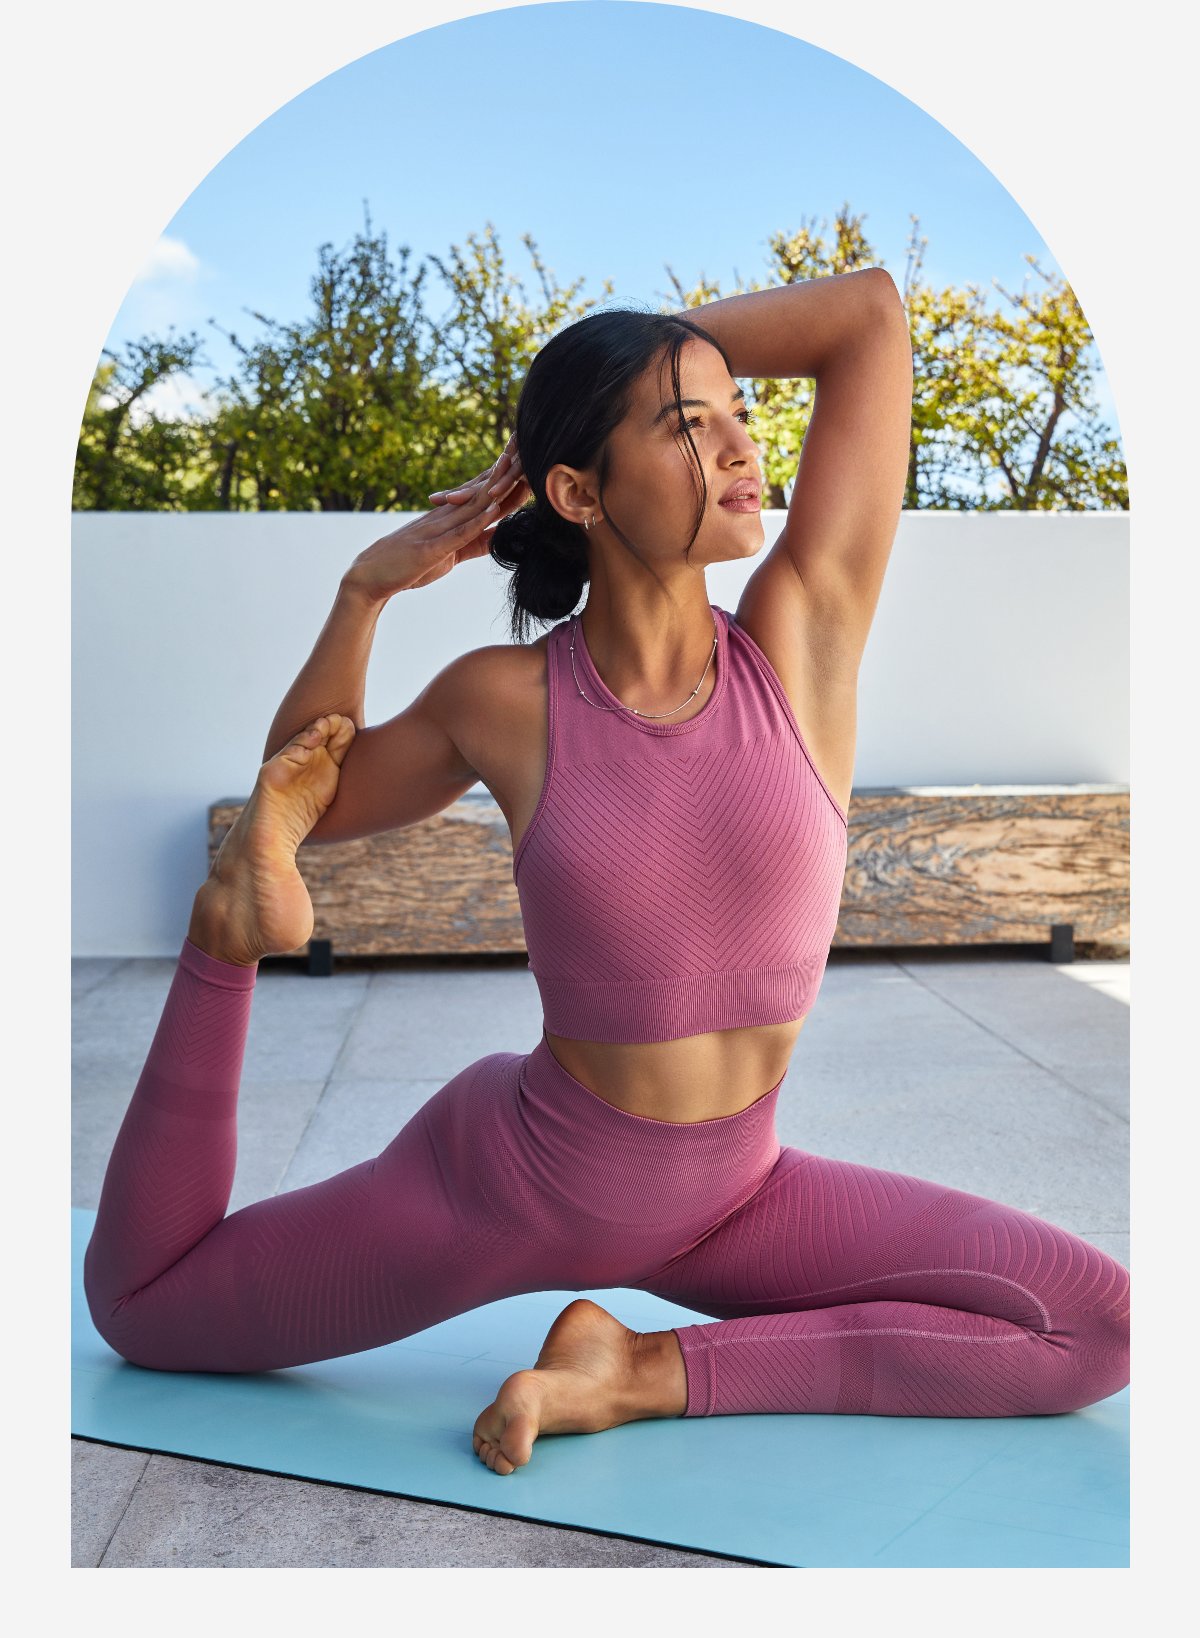 Our new yoga collection is here! - Casall